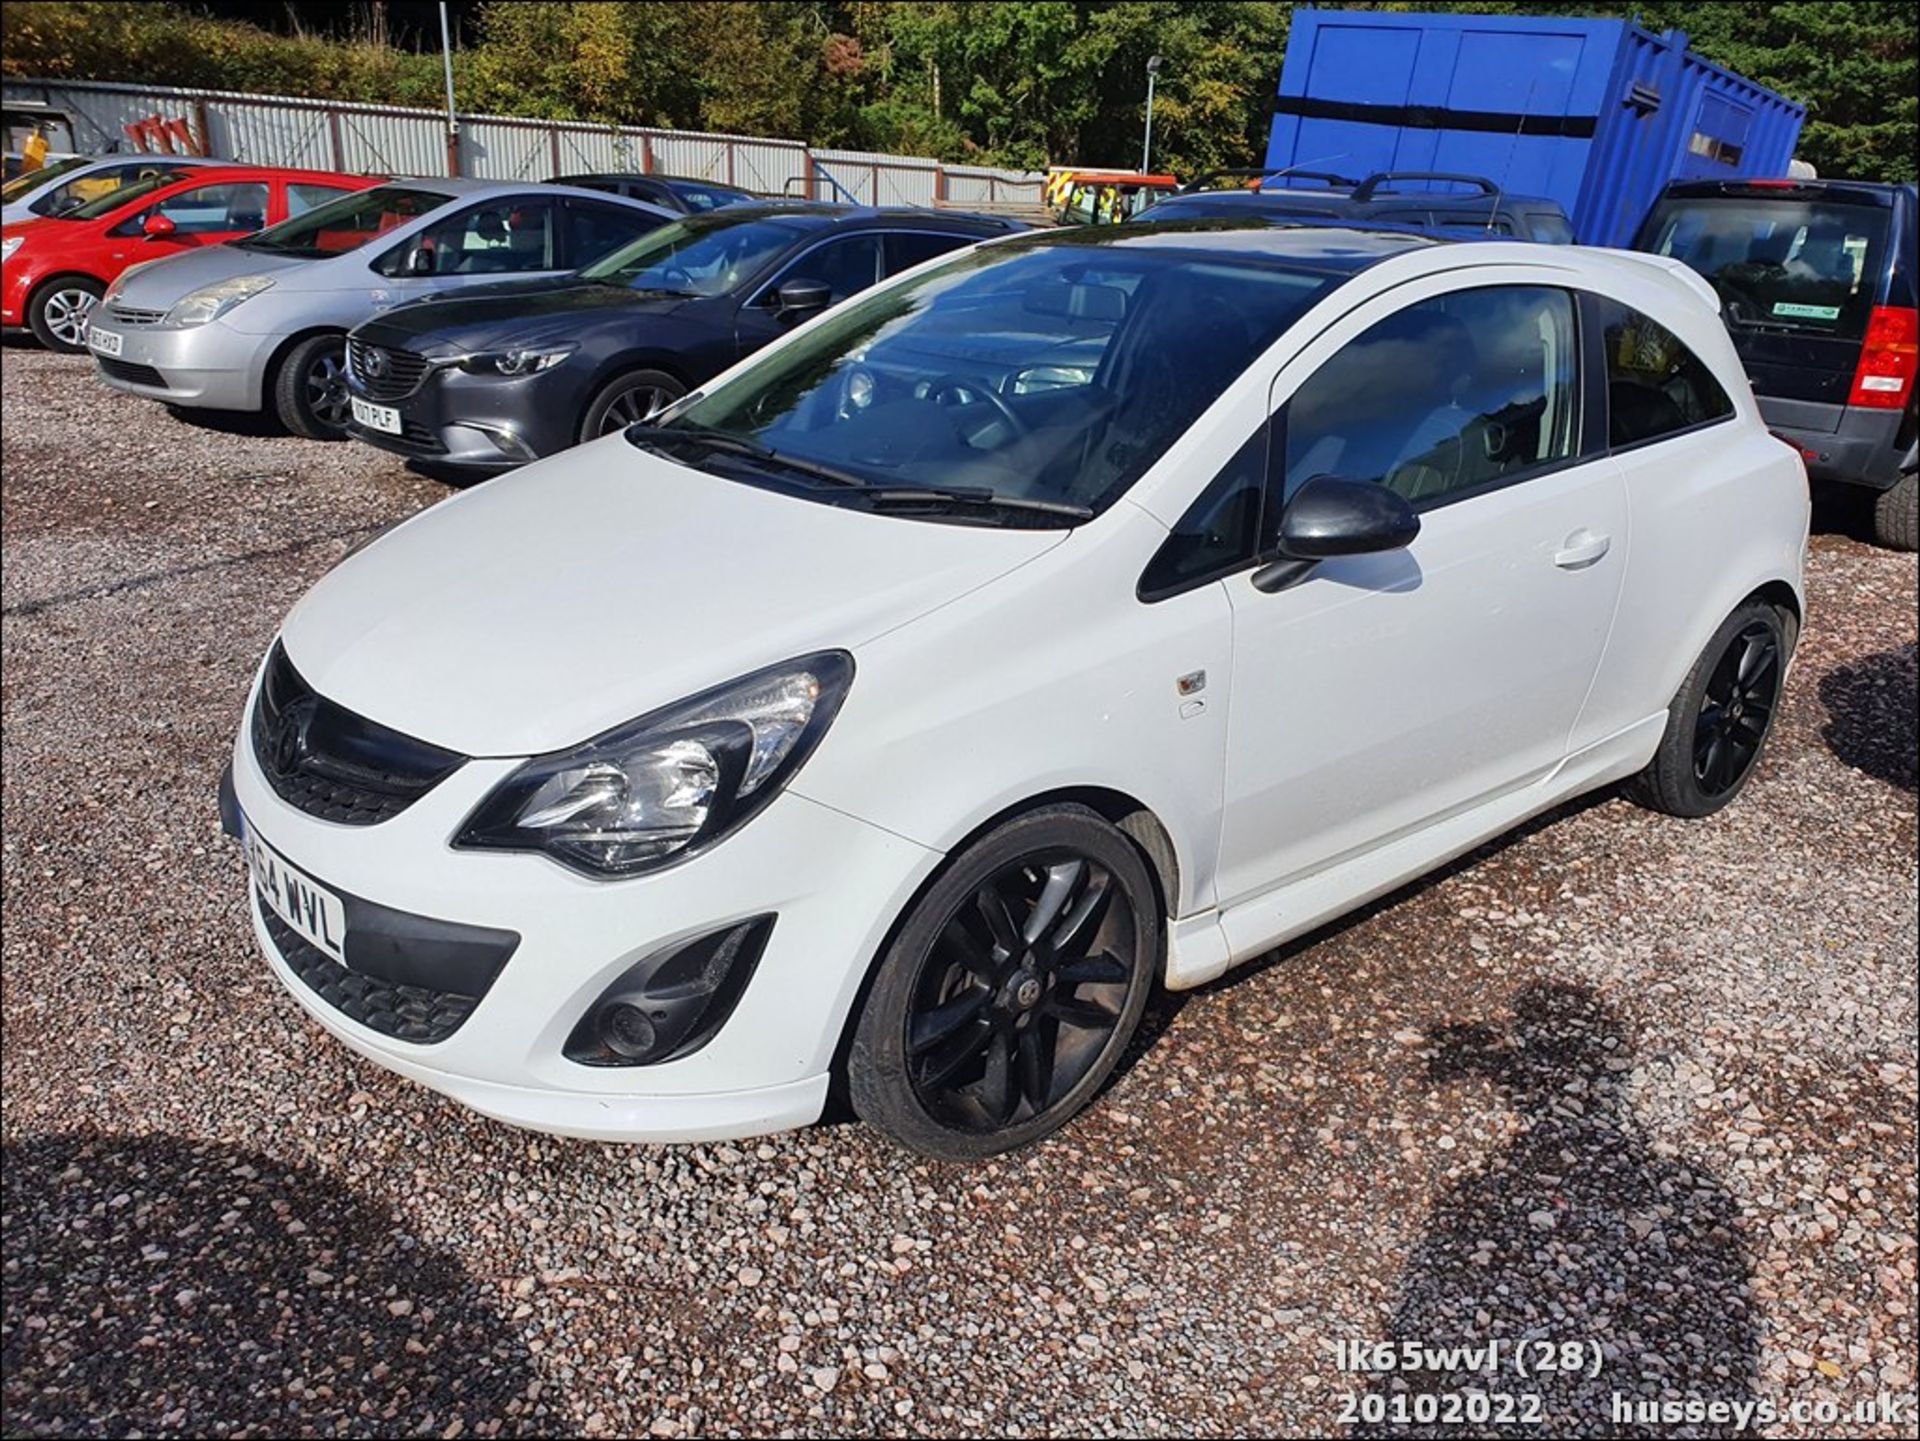 14/64 VAUXHALL CORSA LIMITED EDITION - 1229cc 3dr Hatchback (White, 90k) - Image 28 of 31